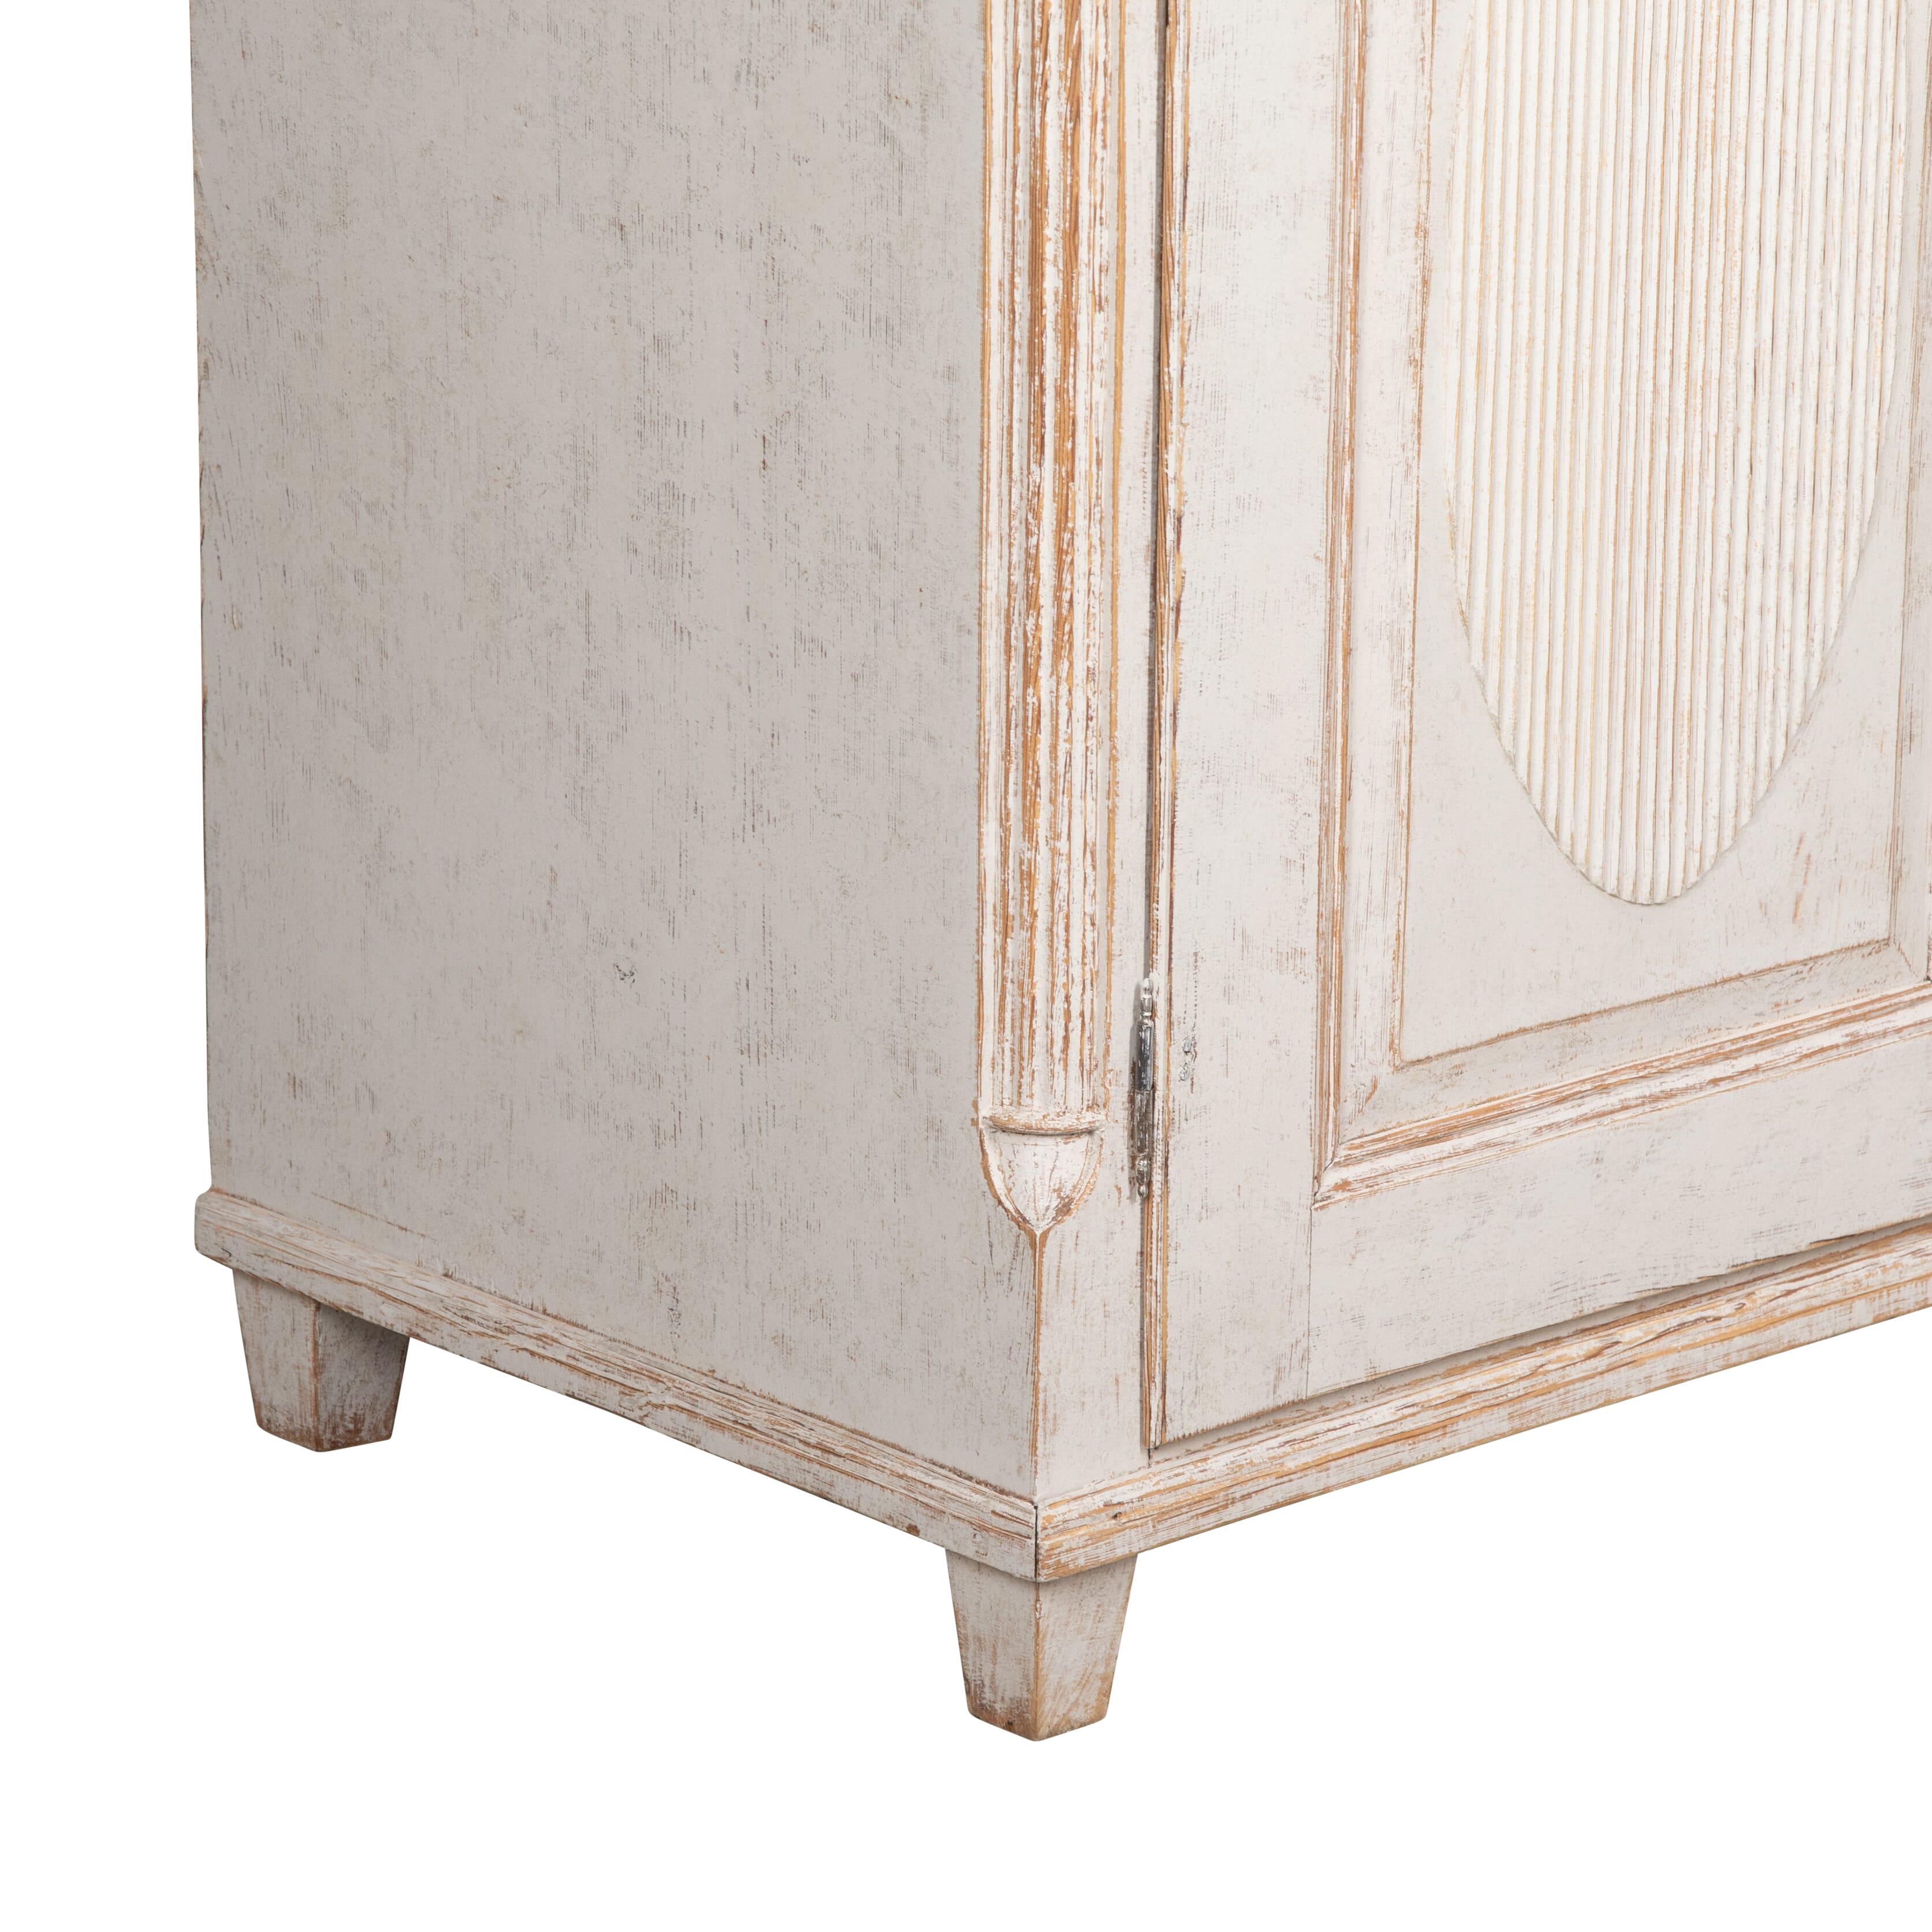 19th Century Gustavian dresser from Varmland Sweden.
Gallery top with two doors below featuring a decorative oval design.
The two doors open to shelved storage, and the outside of the piece has been repainted in a soft grey.